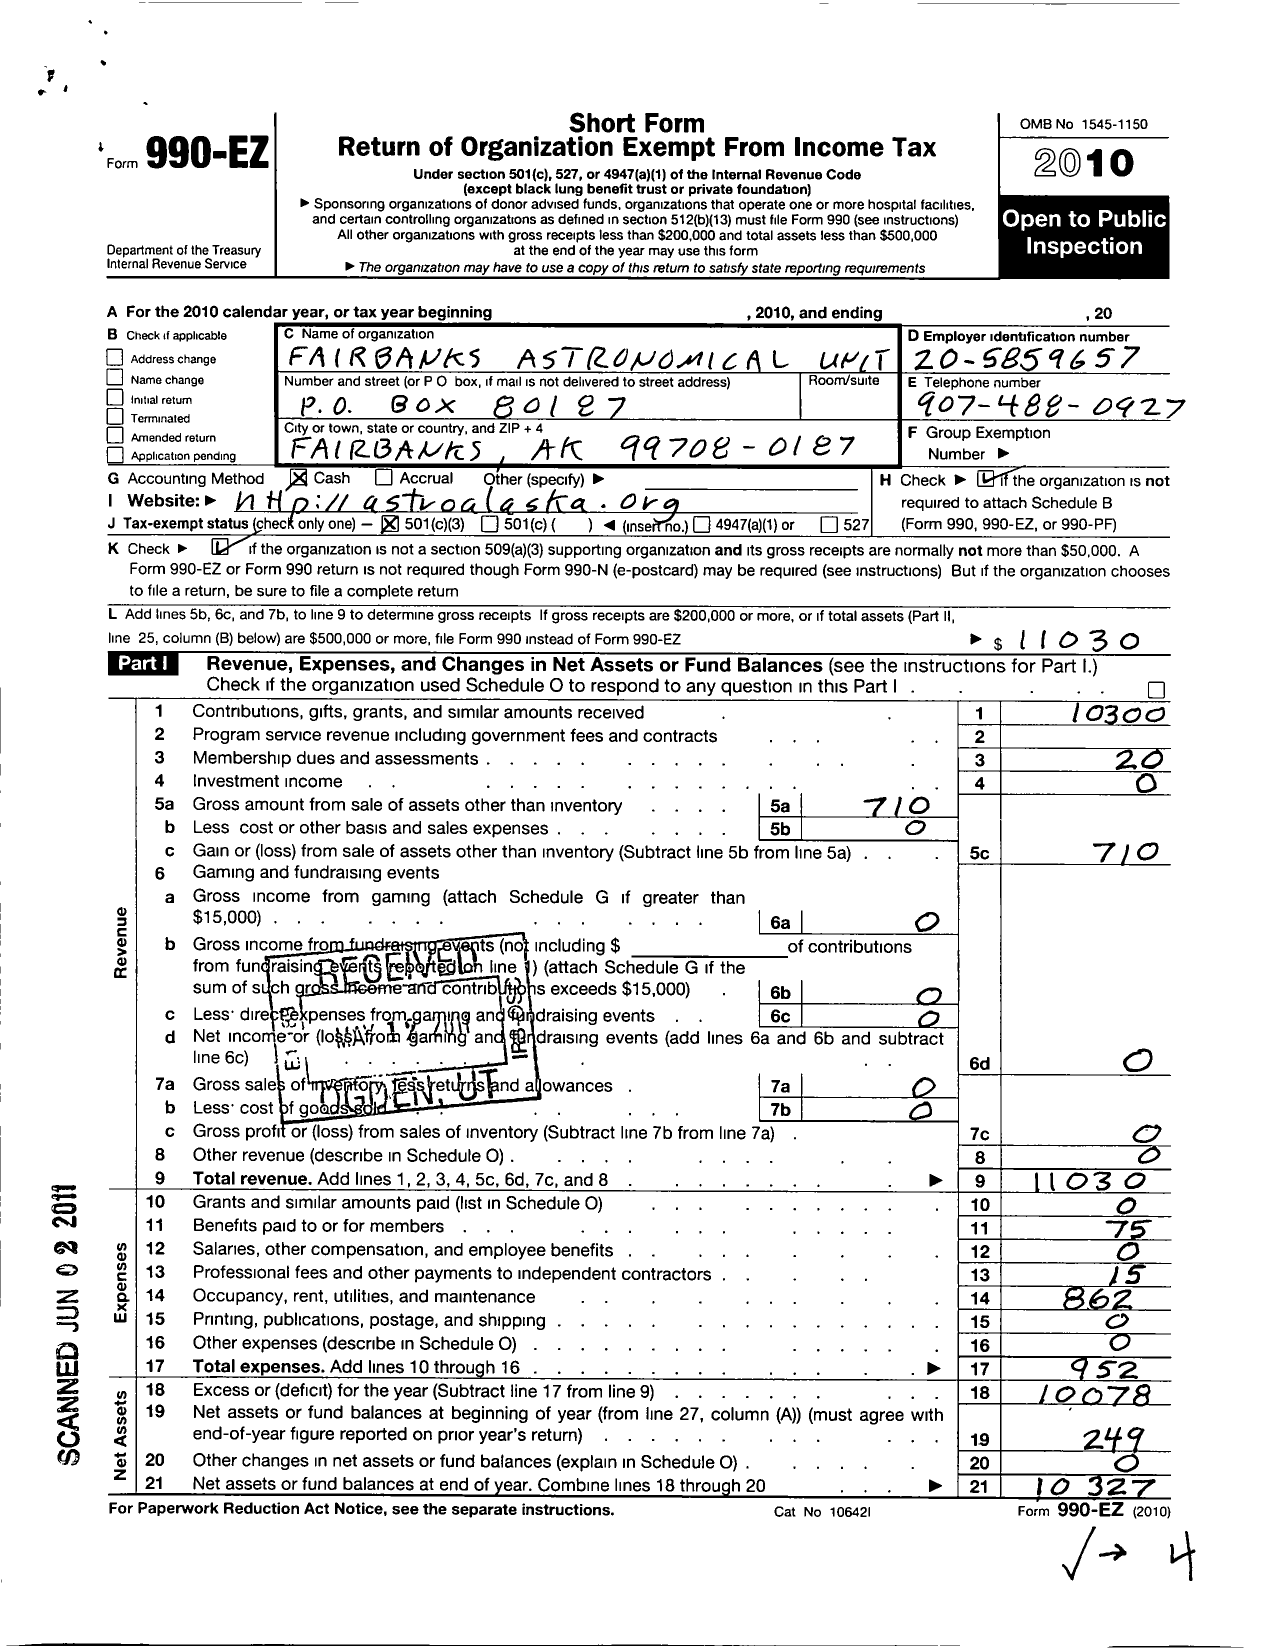 Image of first page of 2010 Form 990EZ for Fairbanks Astronomical Unit